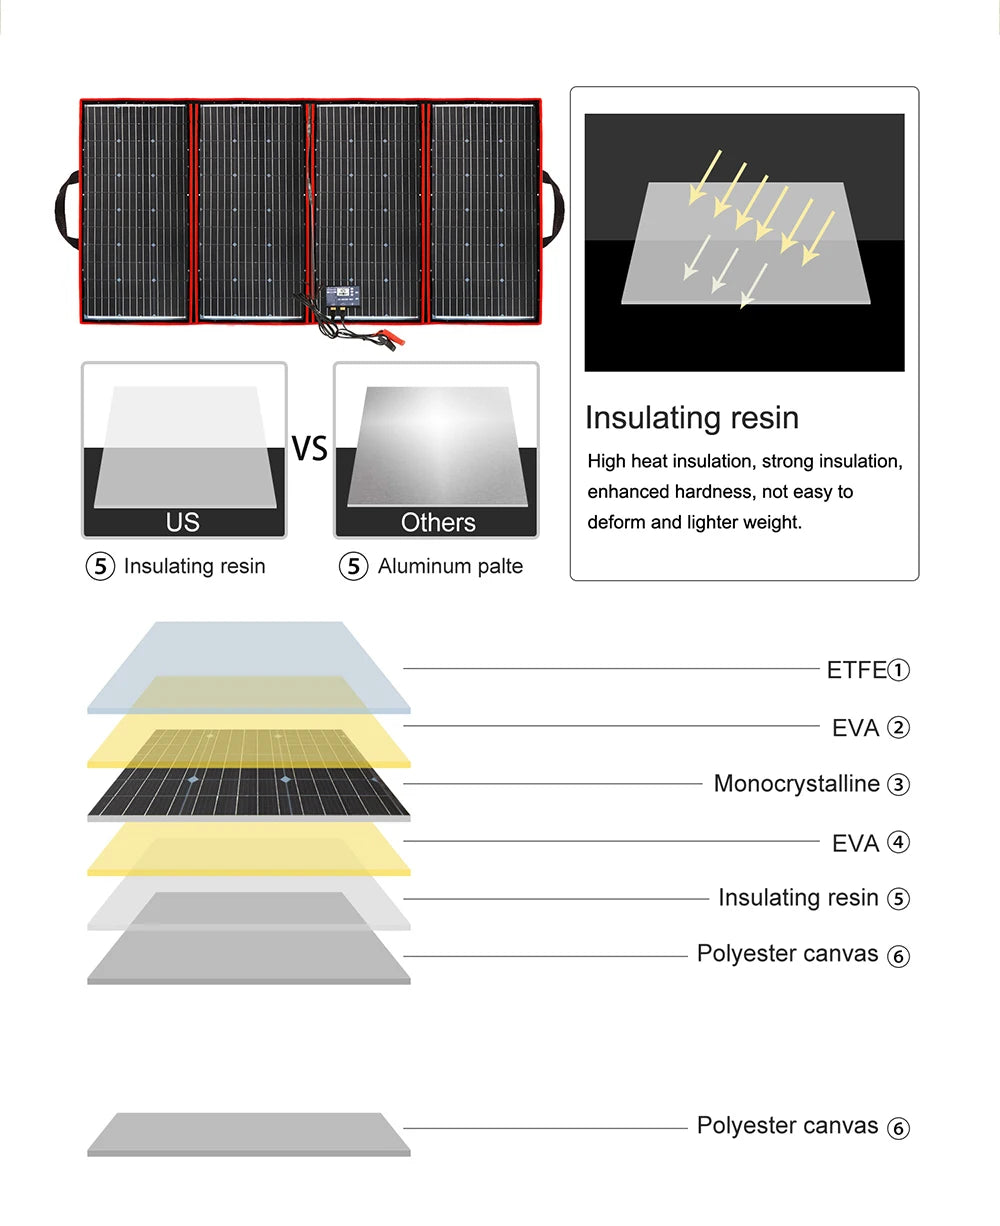 Dokio Flexible Foldable Solar Panel, High-heat insulation, strong deformation protection, and lightweight design for durable and reliable solar panels.